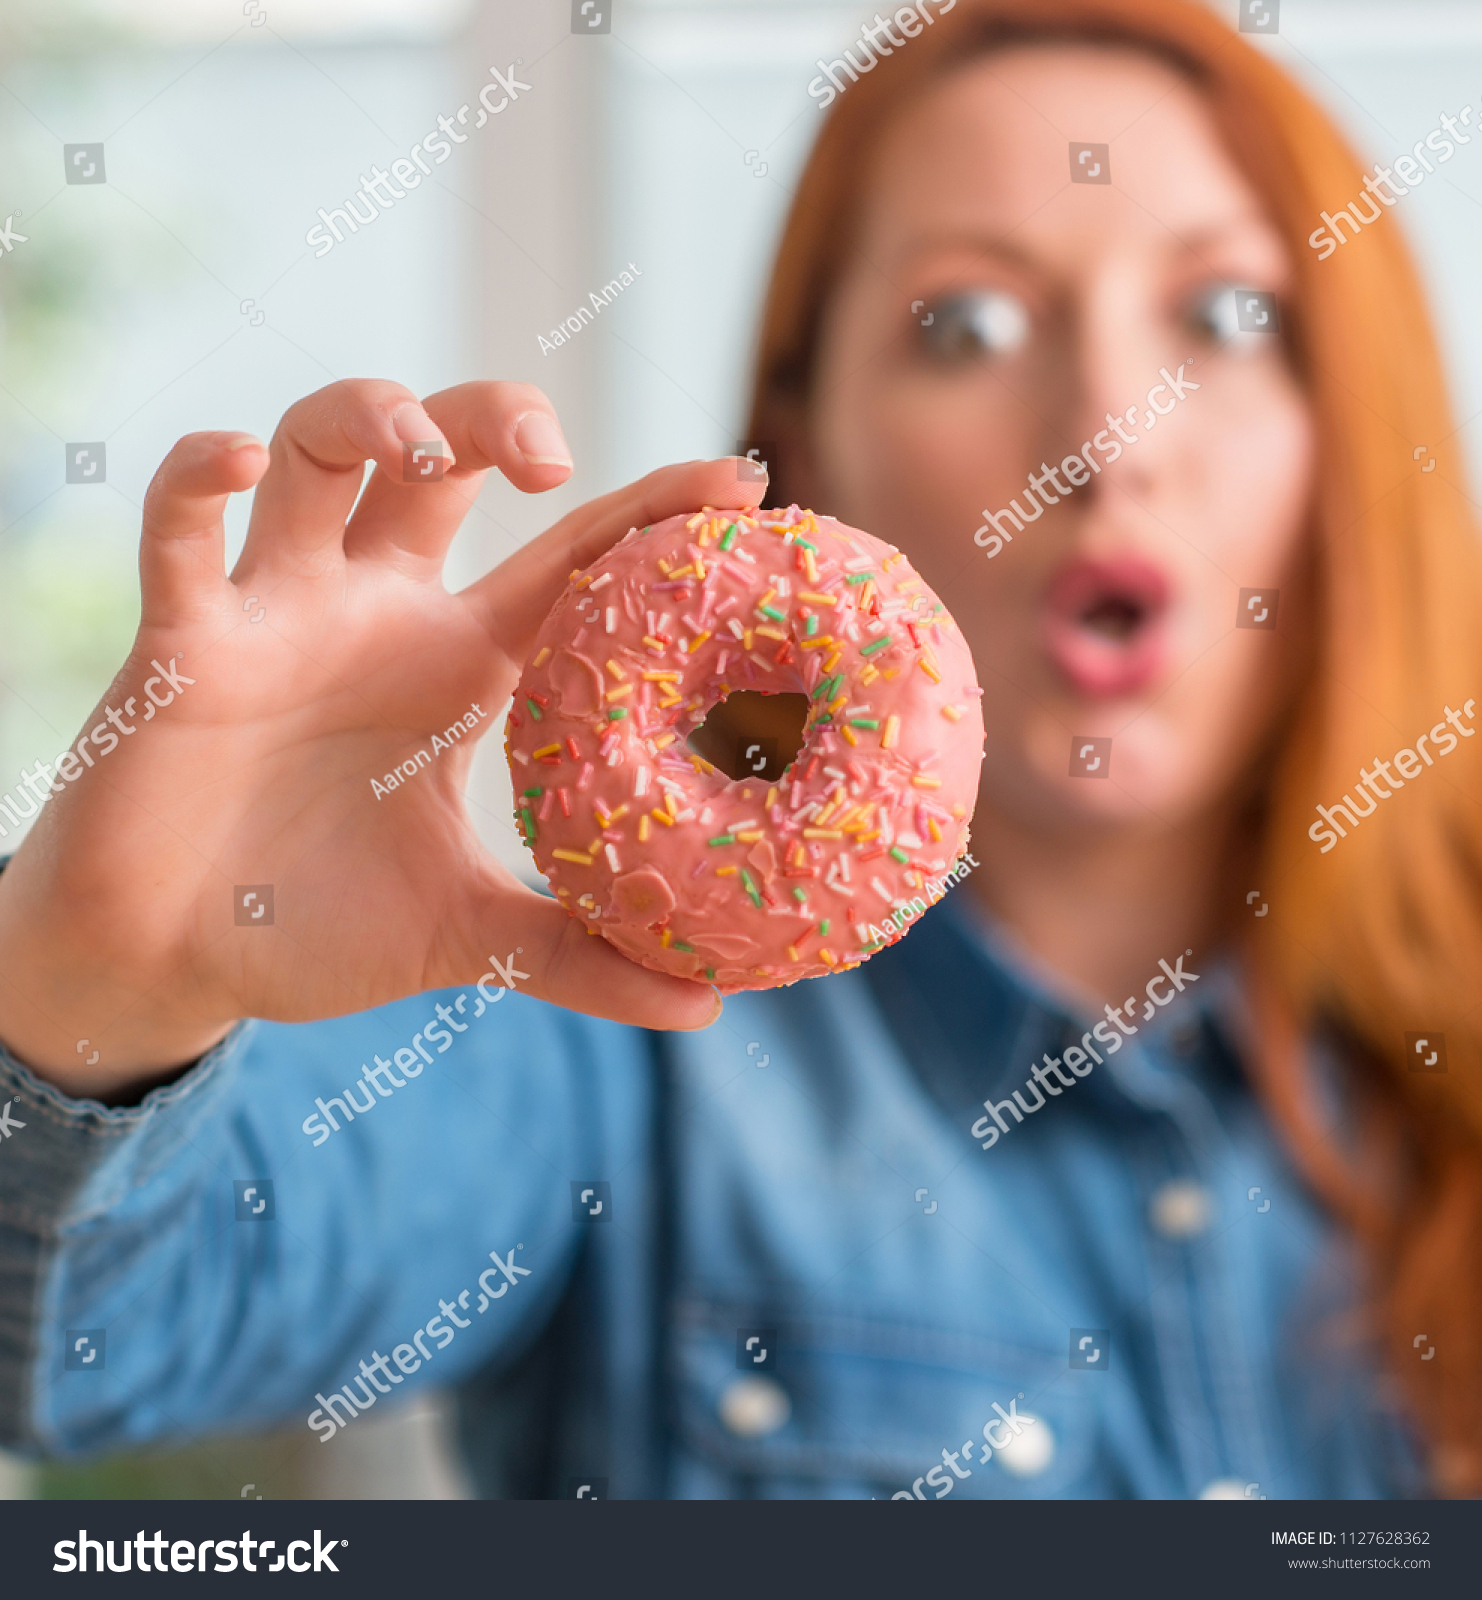 Redhead woman holding donut at home scared in shock with a surprise face, afraid and excited with fear expression #1127628362